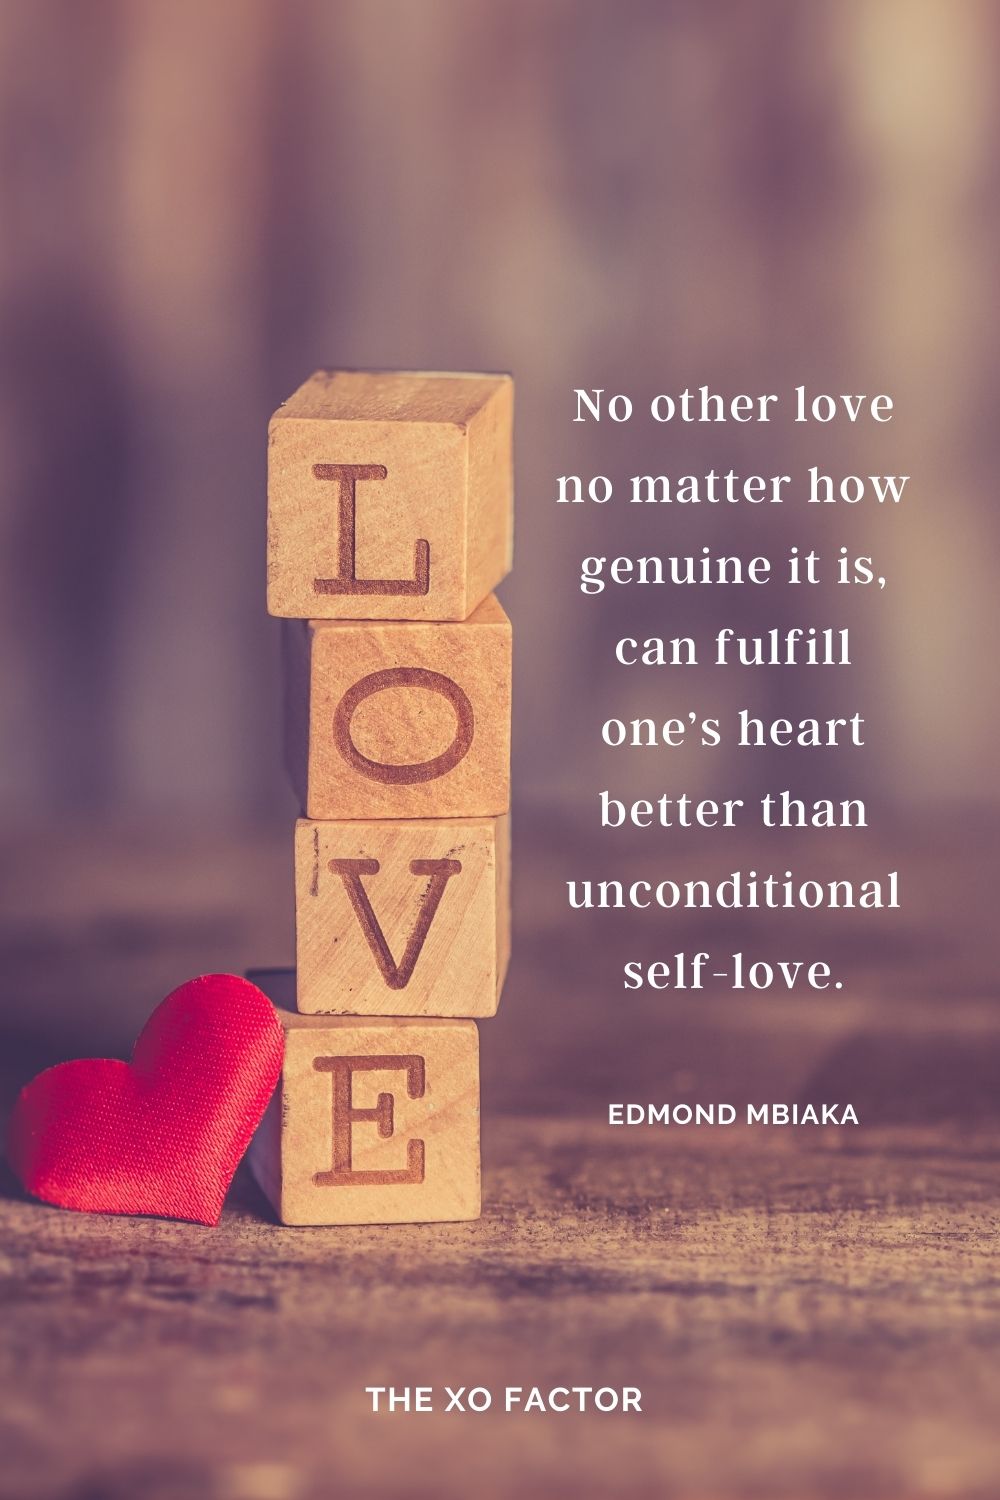 No other love no matter how genuine it is, can fulfill one’s heart better than unconditional self-love. Edmond Mbiaka